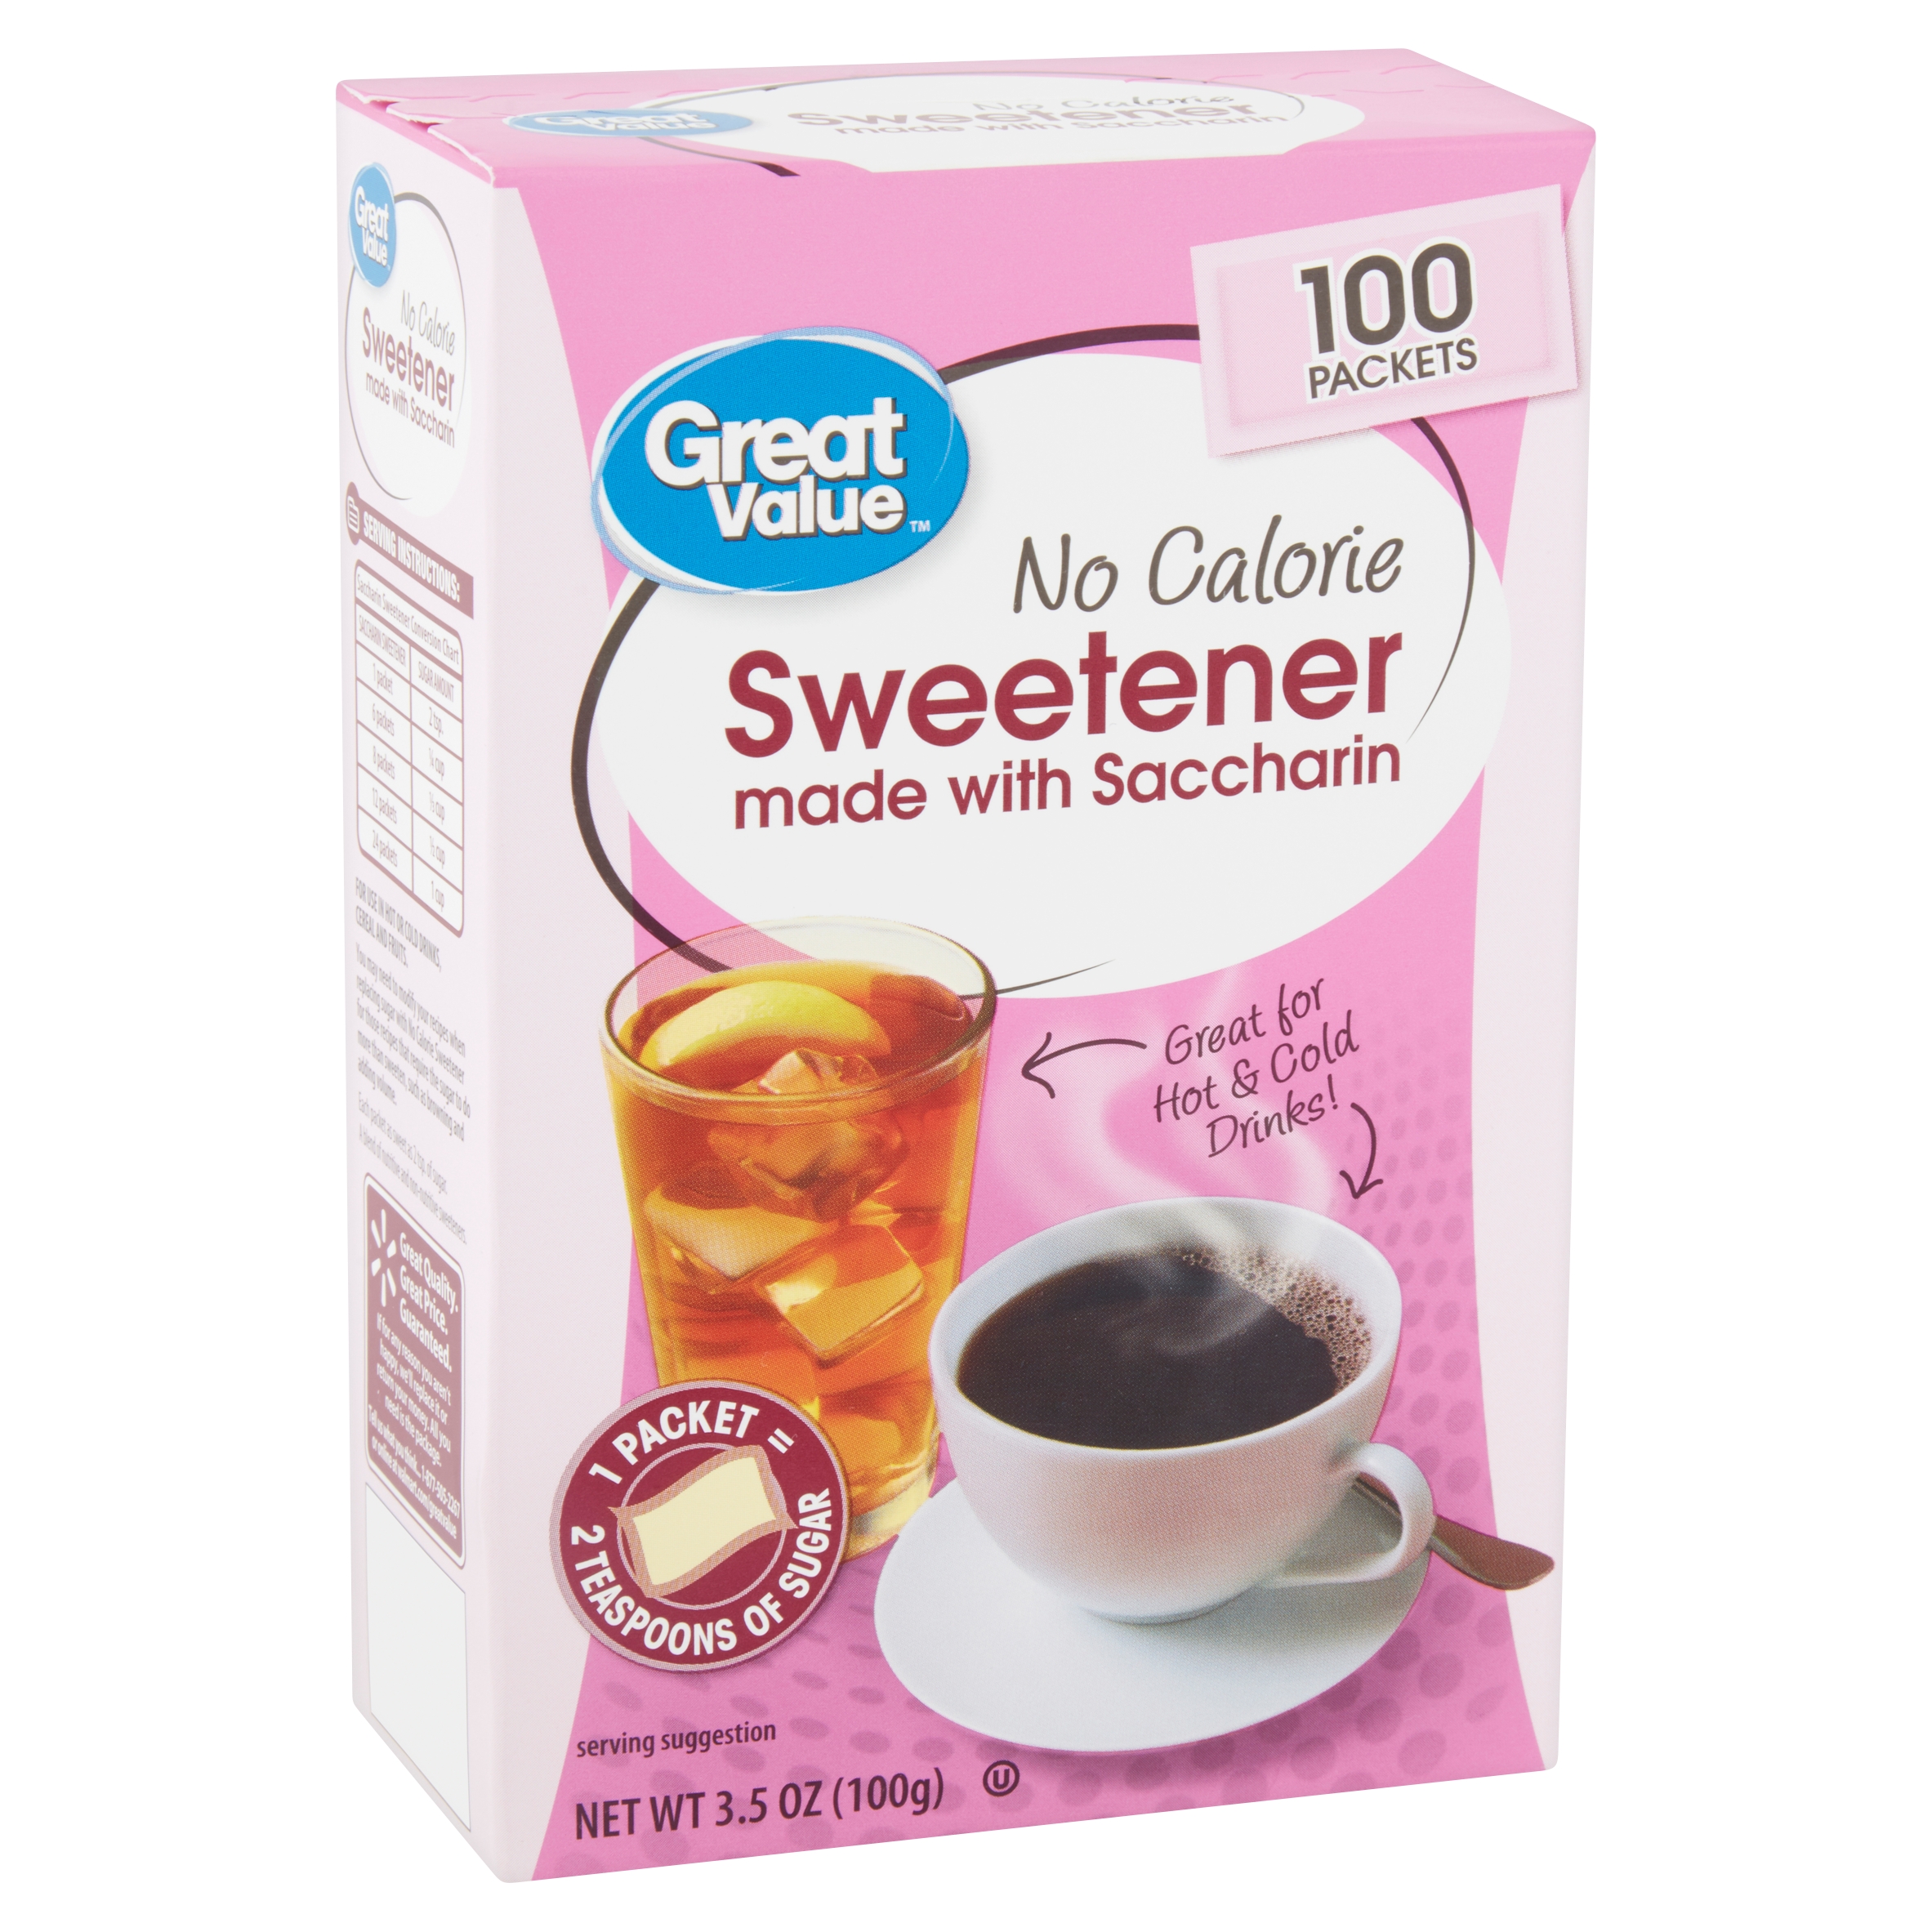 (4 Pack) Great Value Sweetener with Saccharin Packets, No Calorie, 3.5 Oz, 100 Count Image